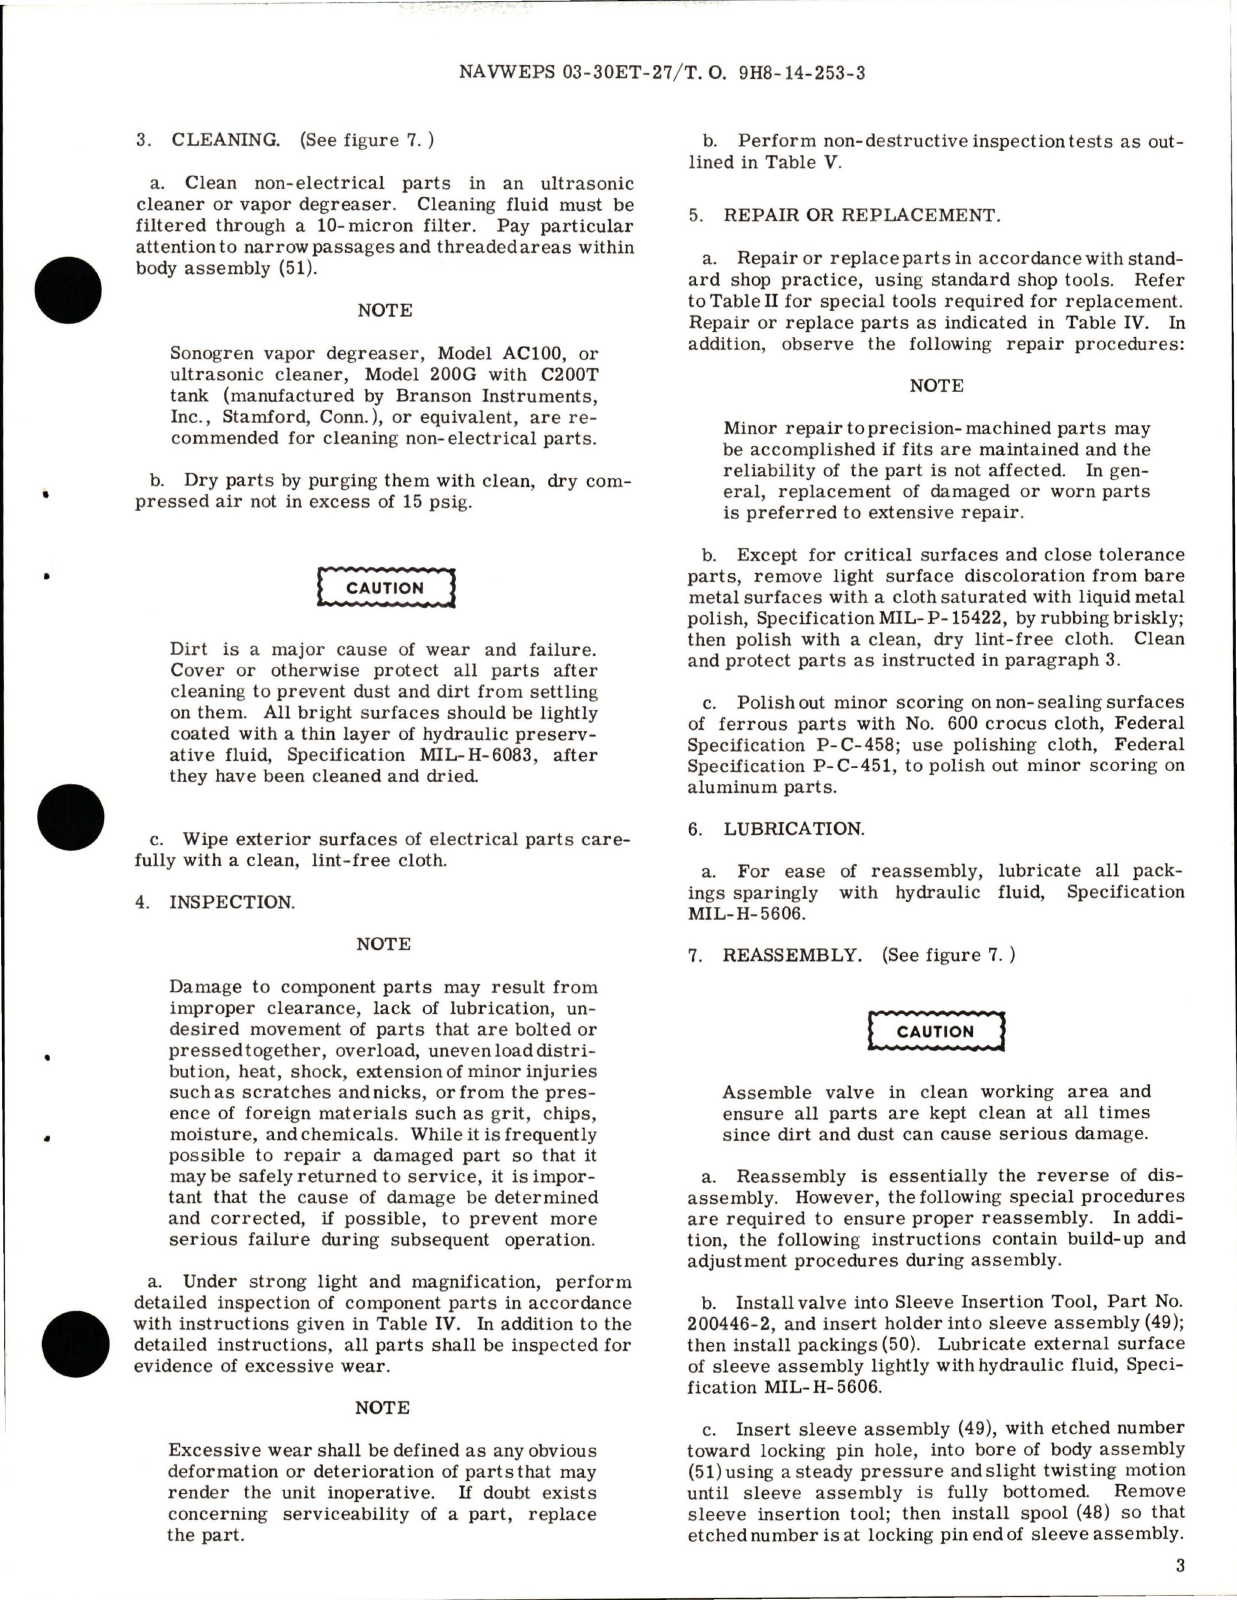 Sample page 5 from AirCorps Library document: Overhaul Instructions with Illustrated Parts for Four-Way Operated Dry Coil Servo Valve - Parts 205400 and 205400A